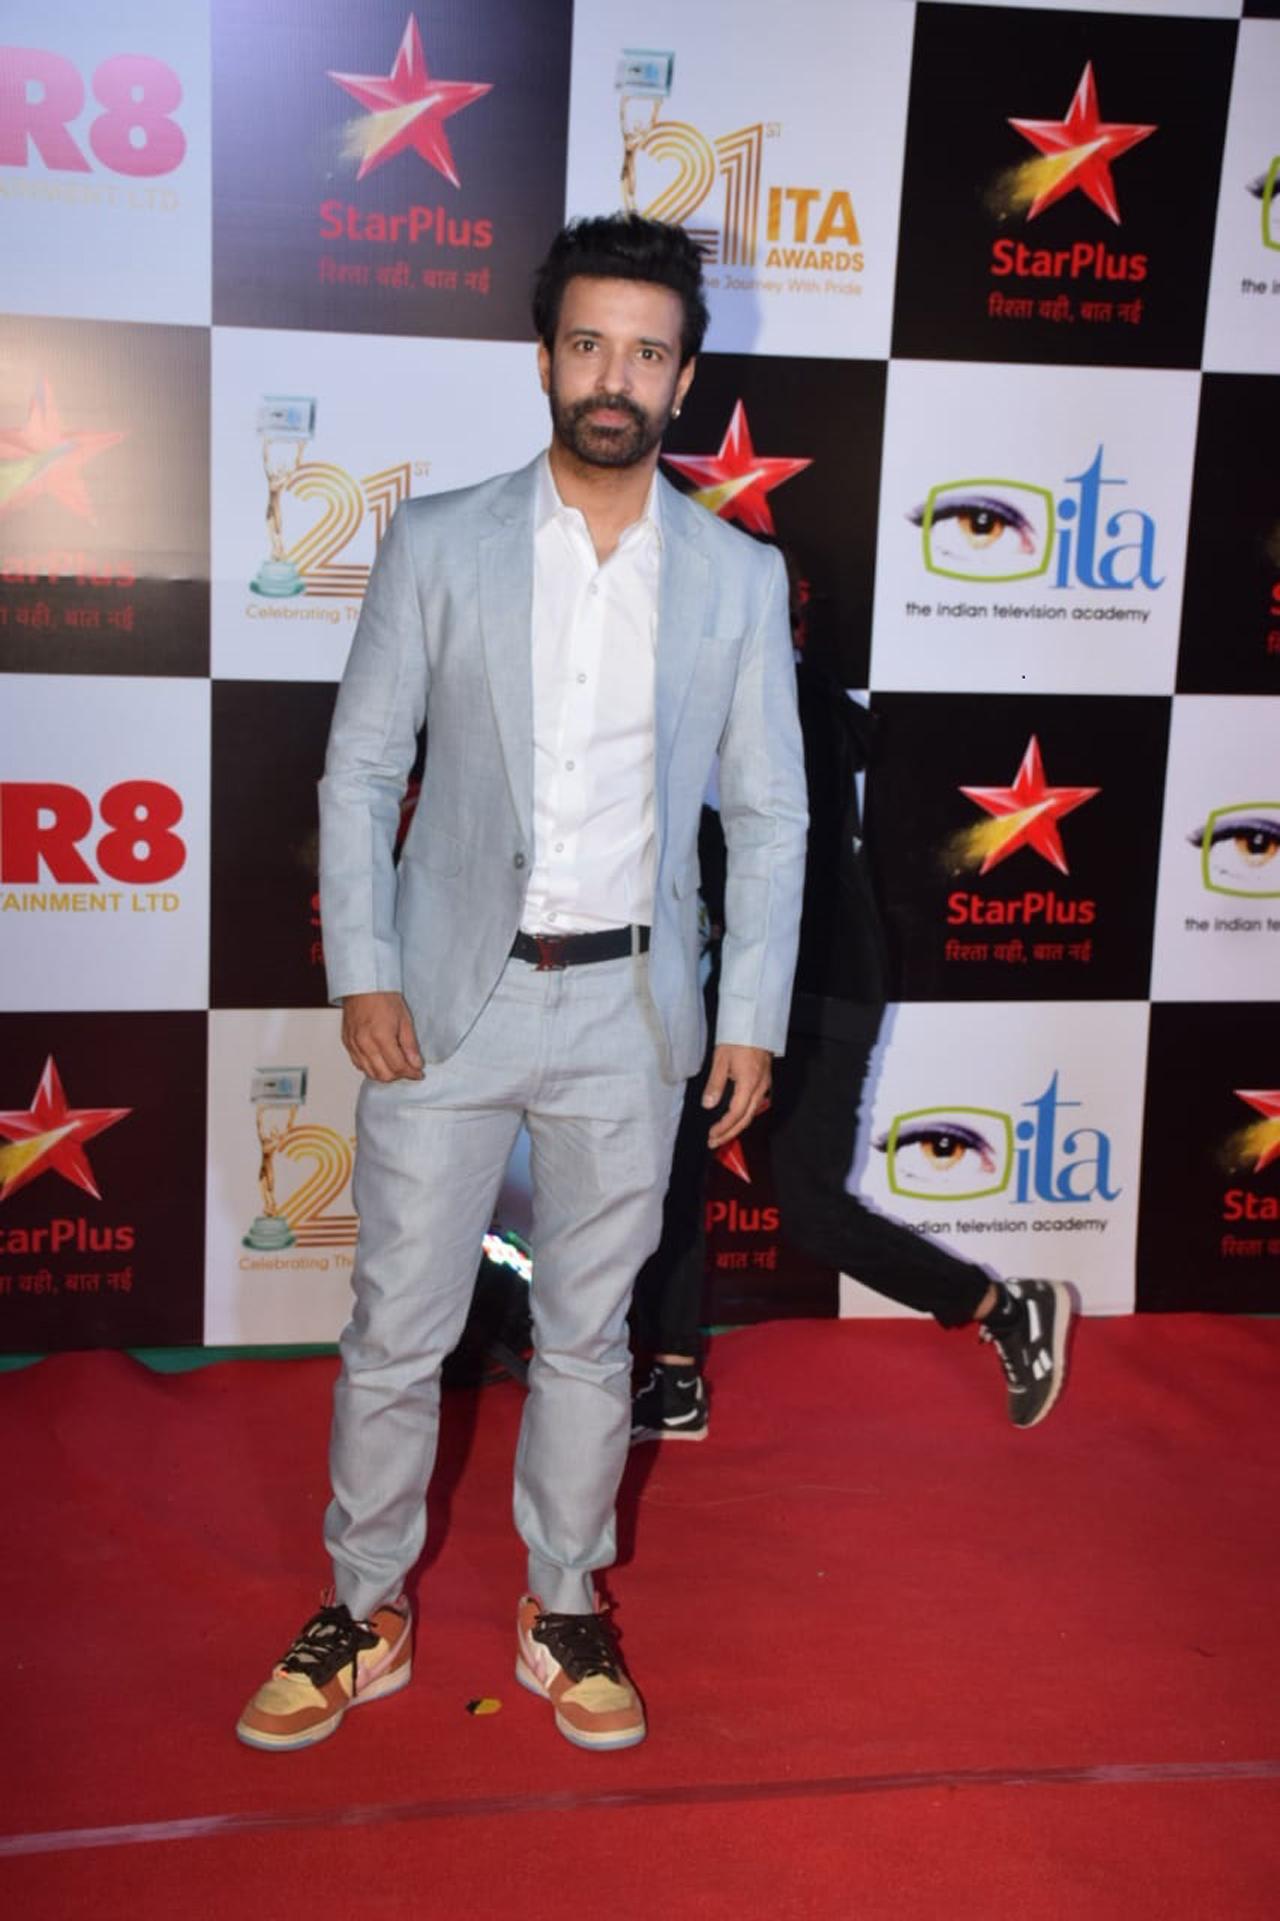 Aamir Ali was also one of the guests who attended 21st Indian Television Academy Awards.